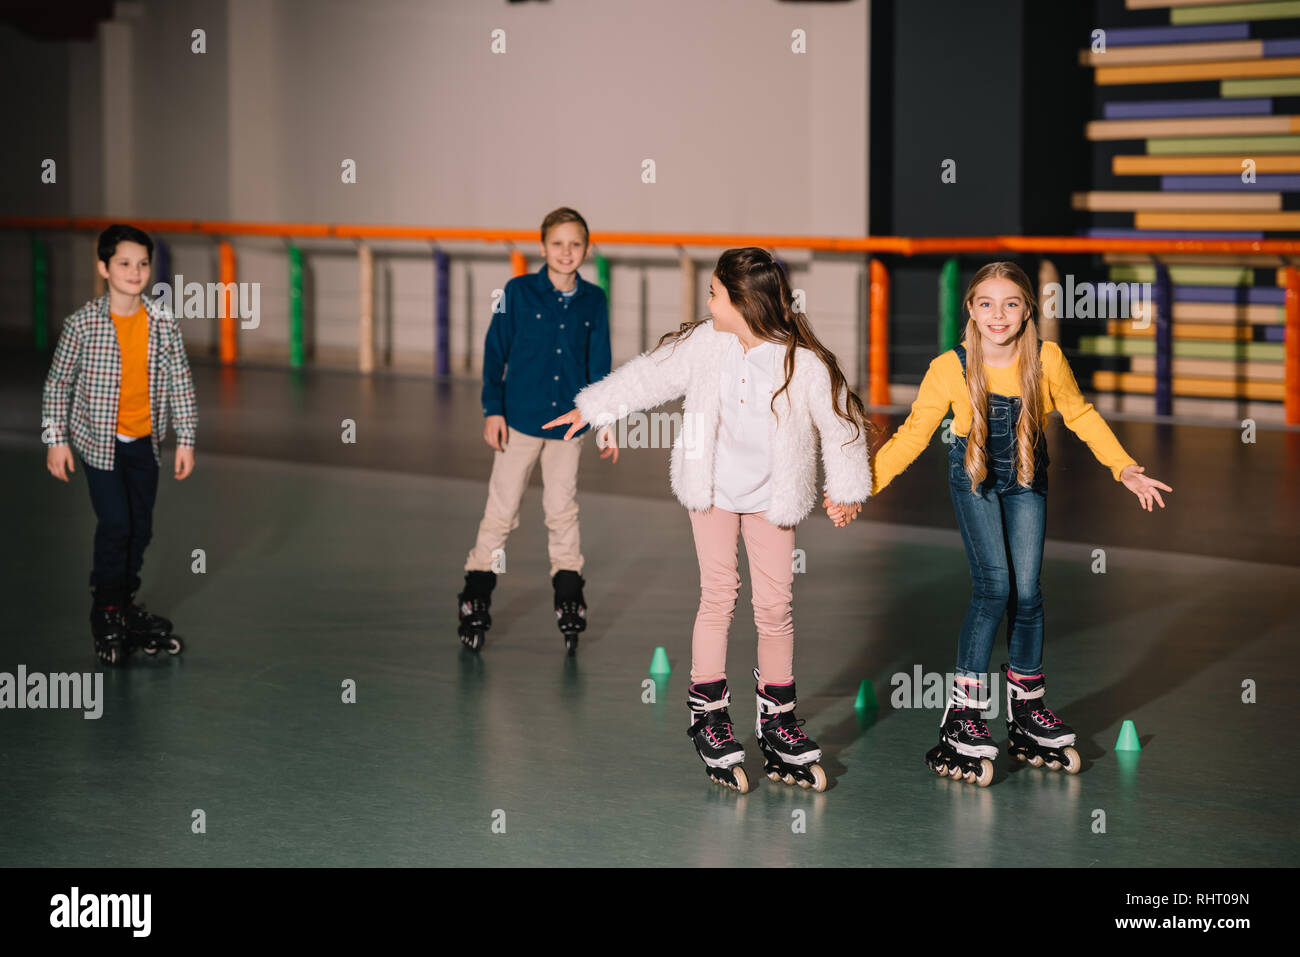 Friends in roller skaters laughing and holding hands Stock Photo